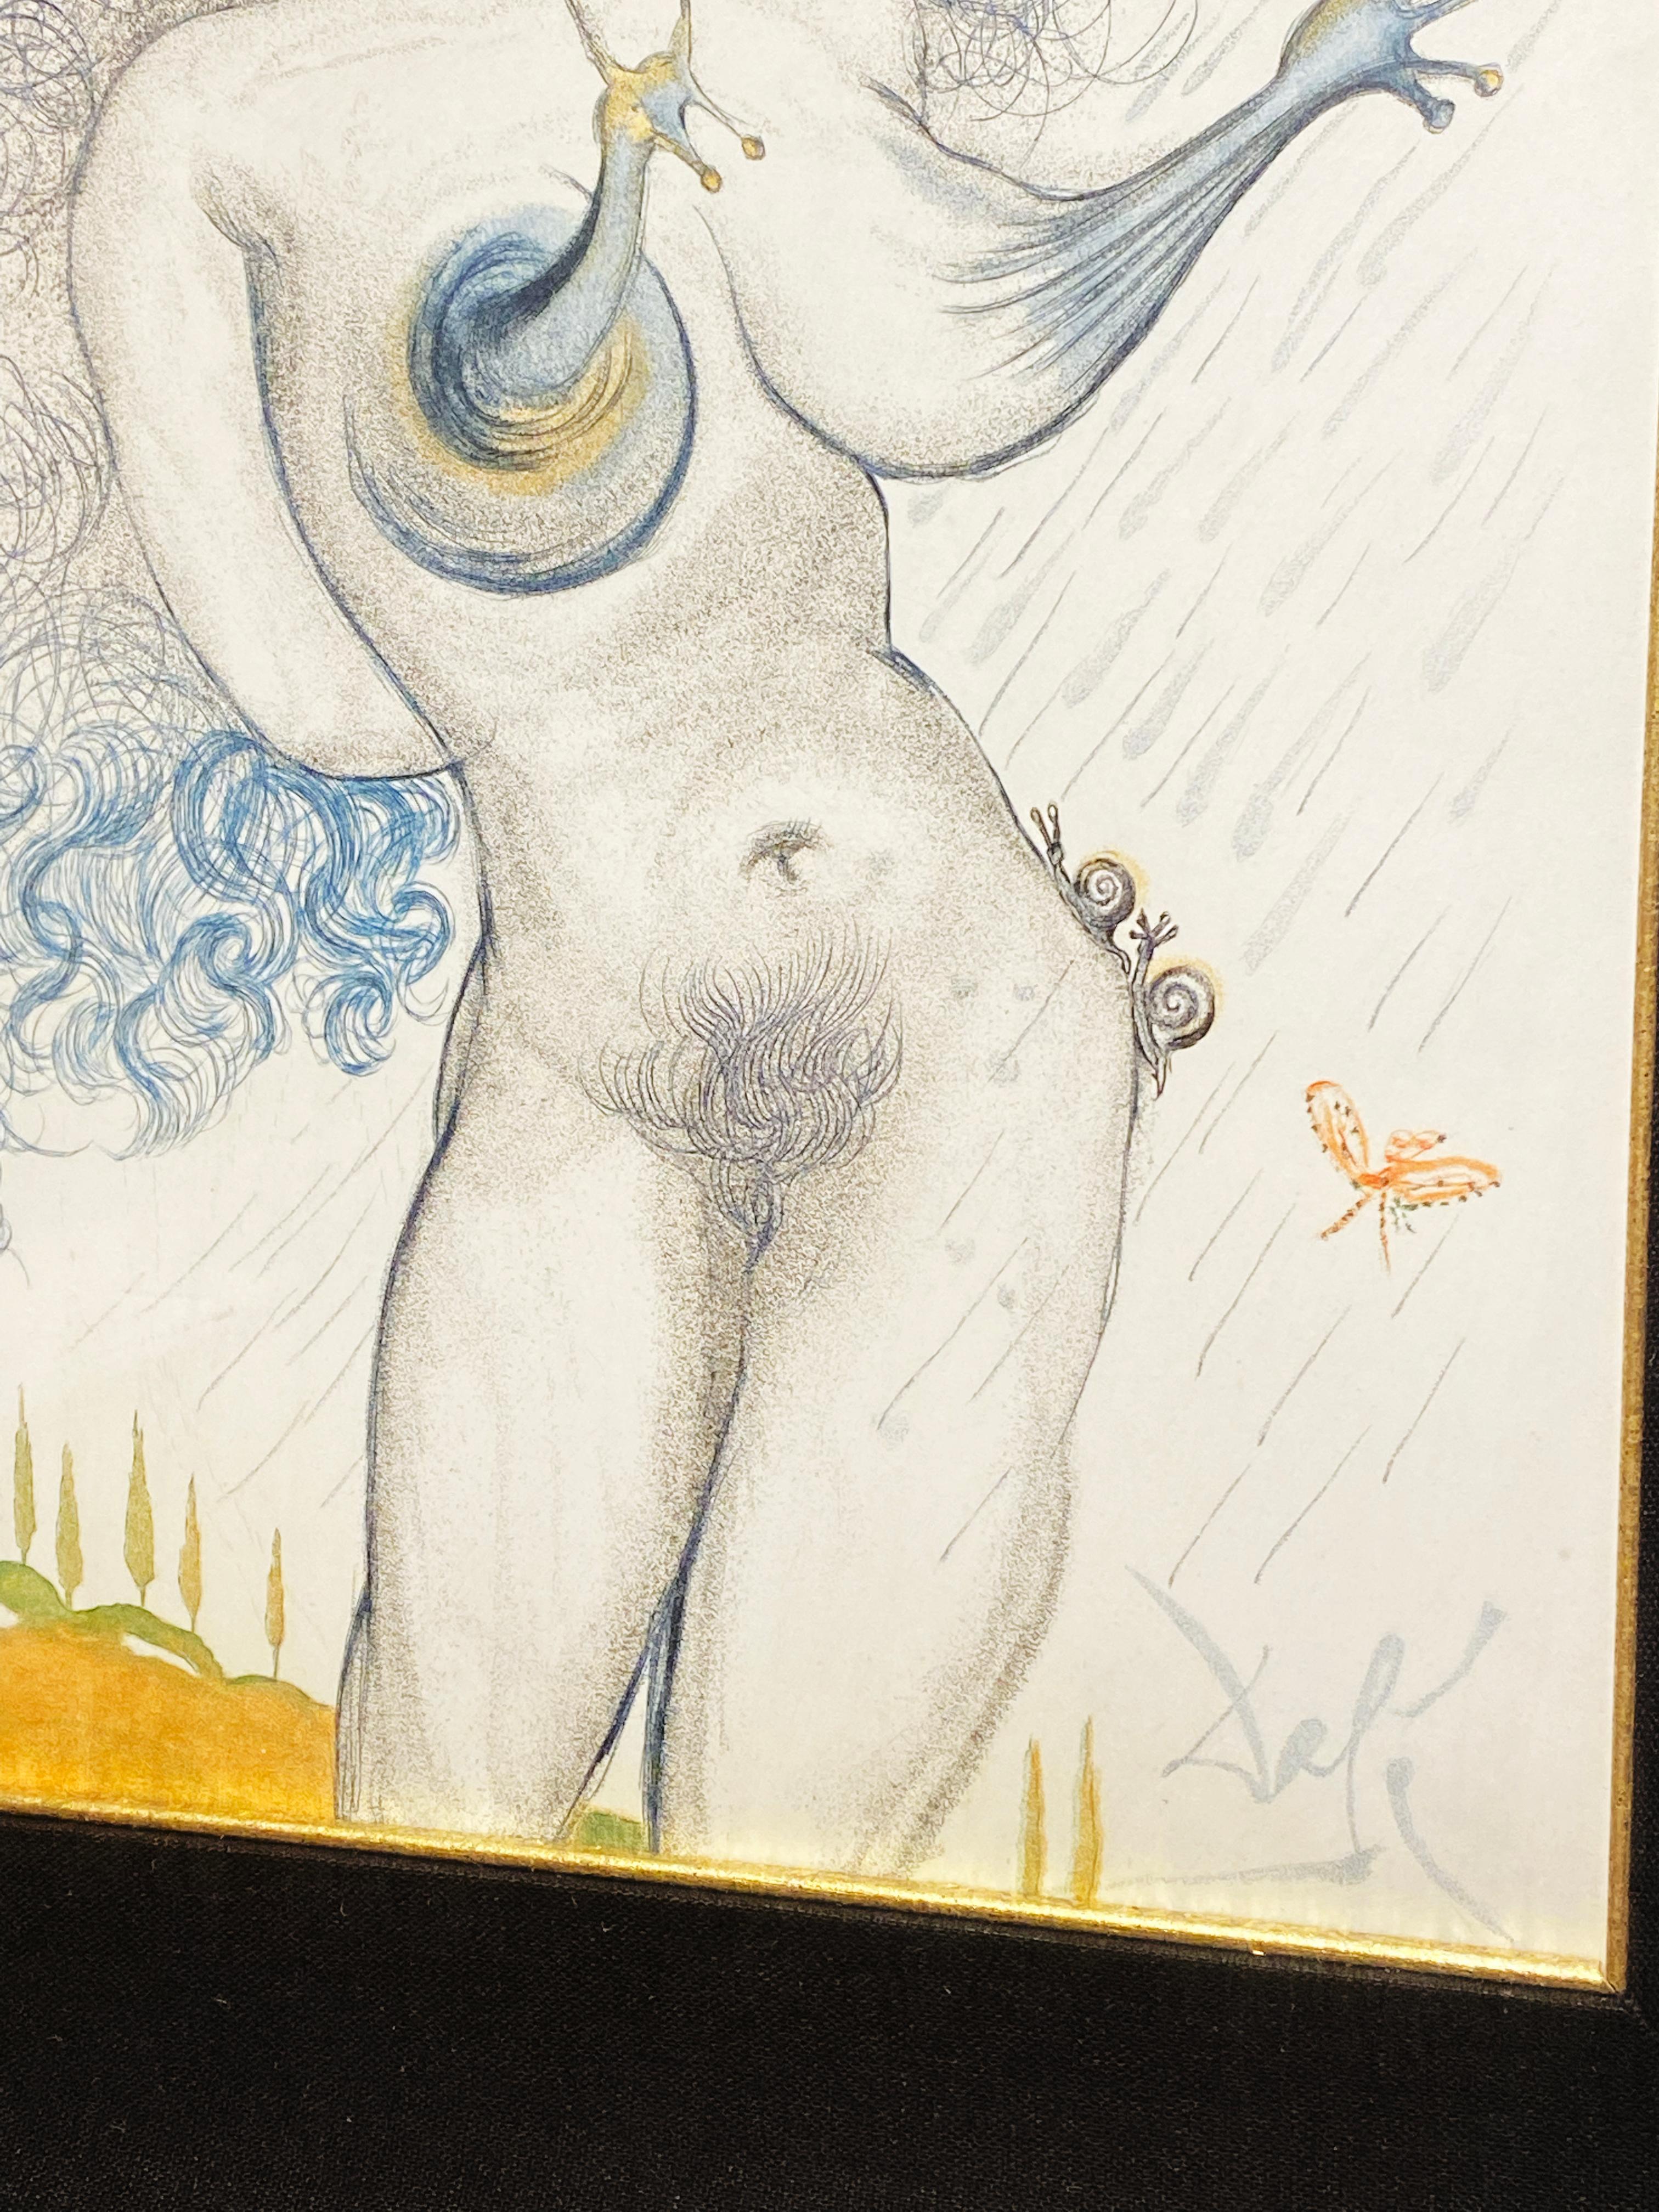 Nude with Snail Breasts - Surrealist Print by Salvador Dalí